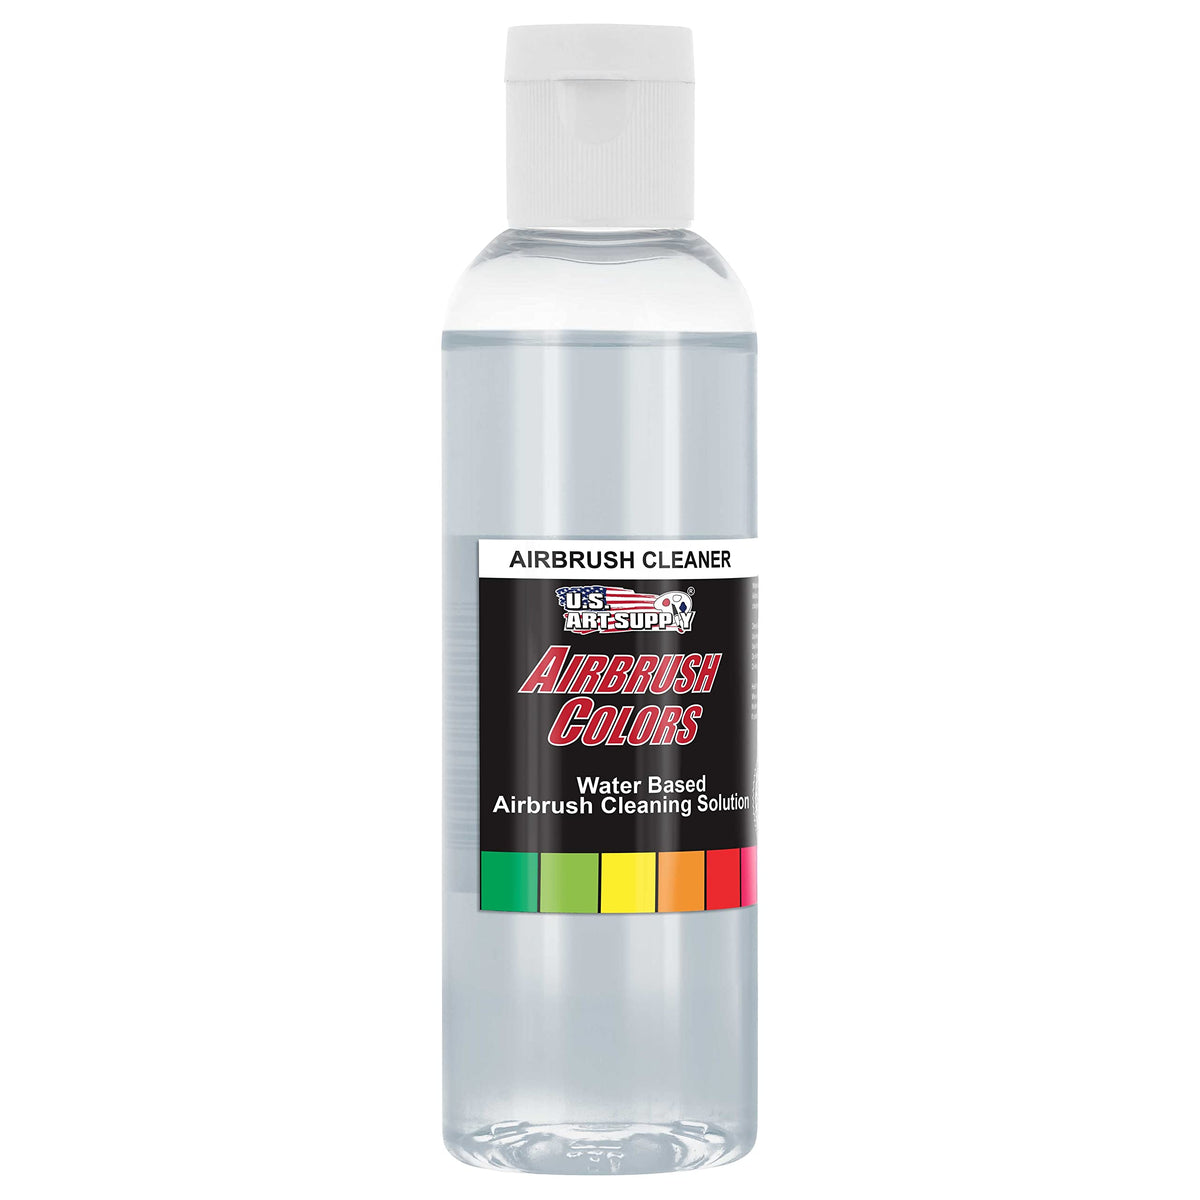  Airbrush Cleaner (16-oz Per Bottle), Made in The USA